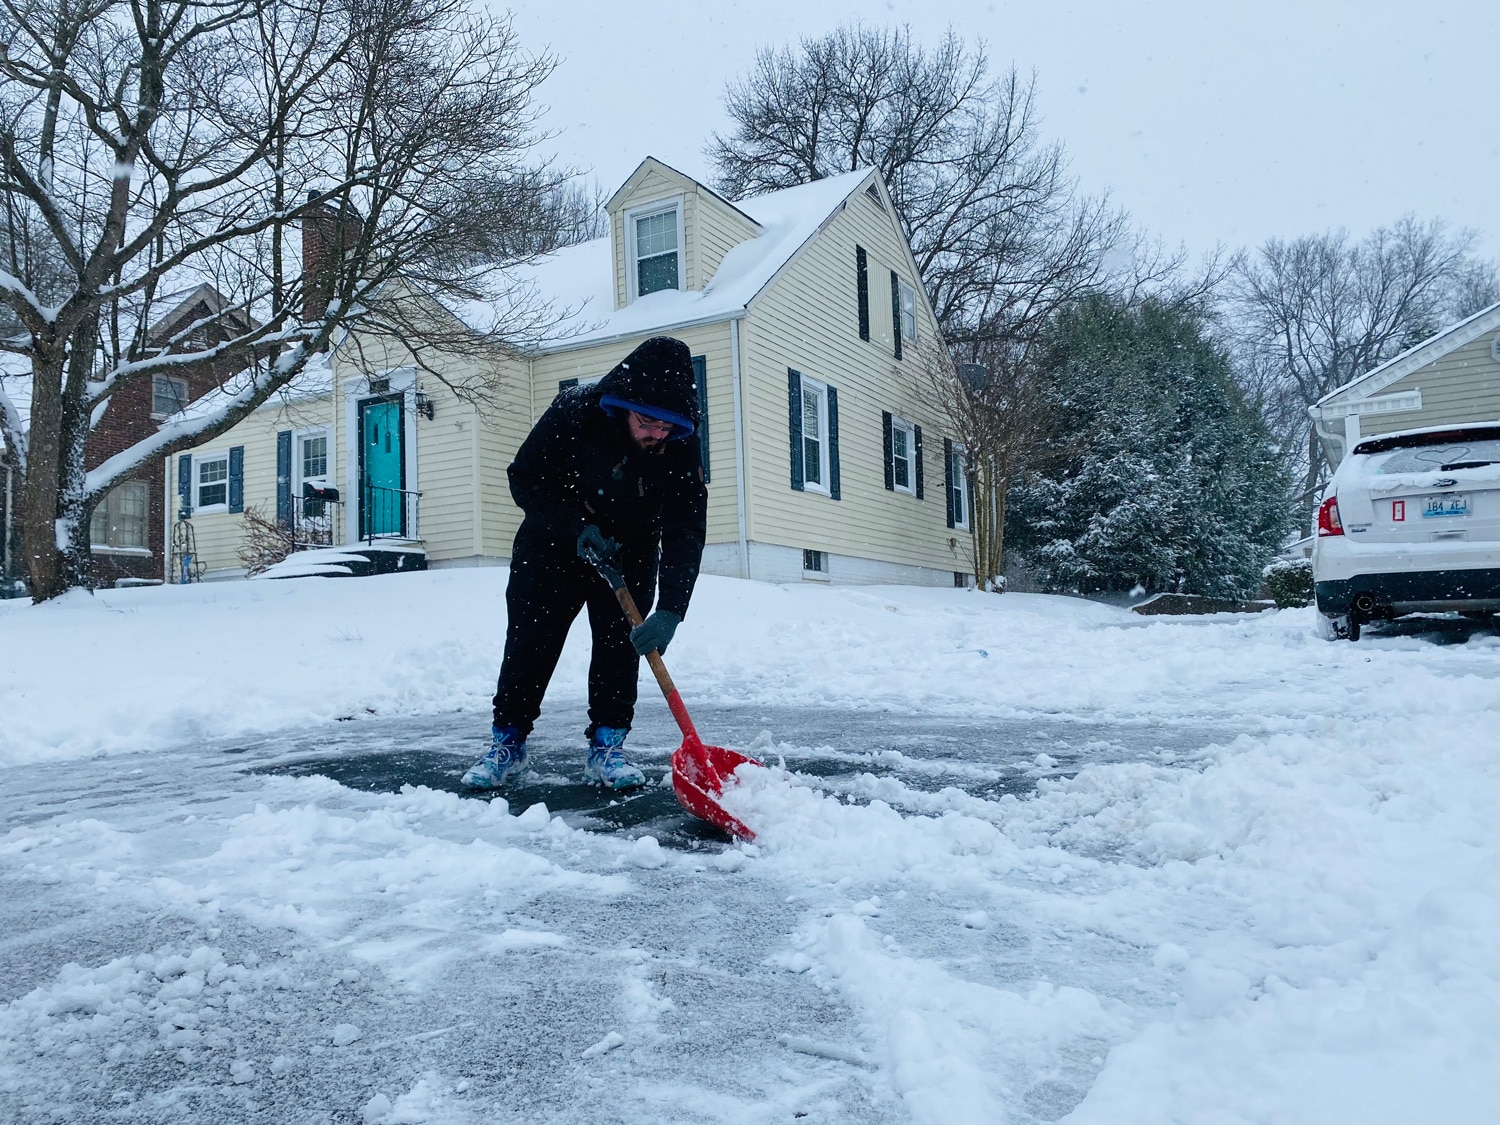 Jacob Farnsley, of Kingsport, Tennessee, shovels snow Thursday, Jan. 6, 2022, from a driveway on Mooreland Drive. He was in town visiting family when the snow hit. (Photo by Jennifer P. Brown)